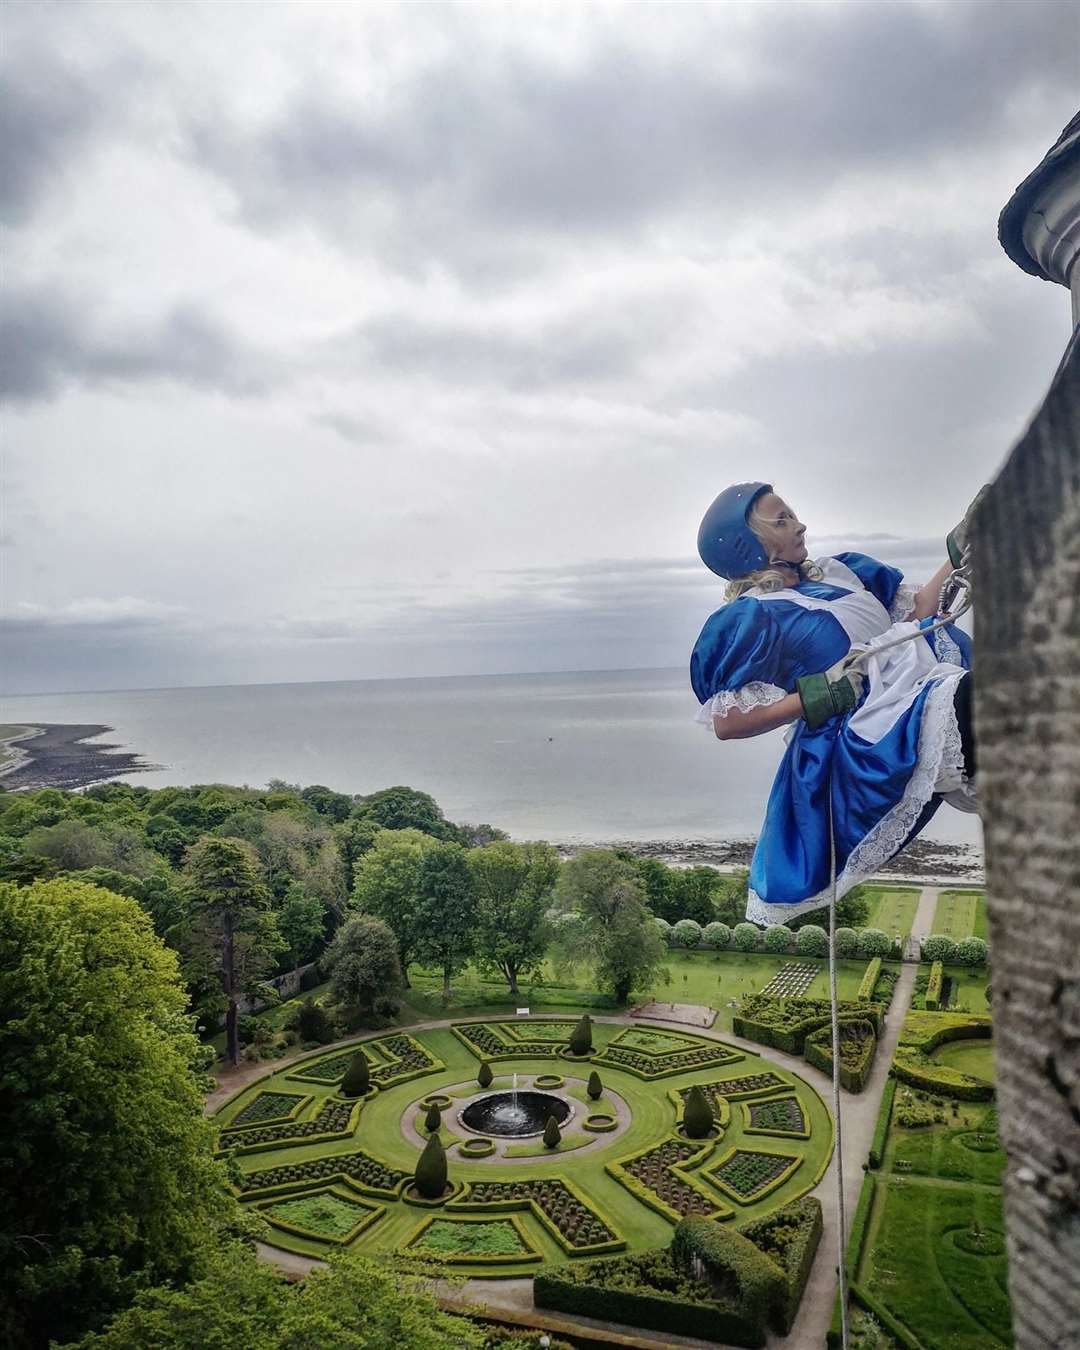 Mary Nimmo, chairwoman of Archie Highland's management committee attempts an abseil from the highest tower of Dunrobin Castle.